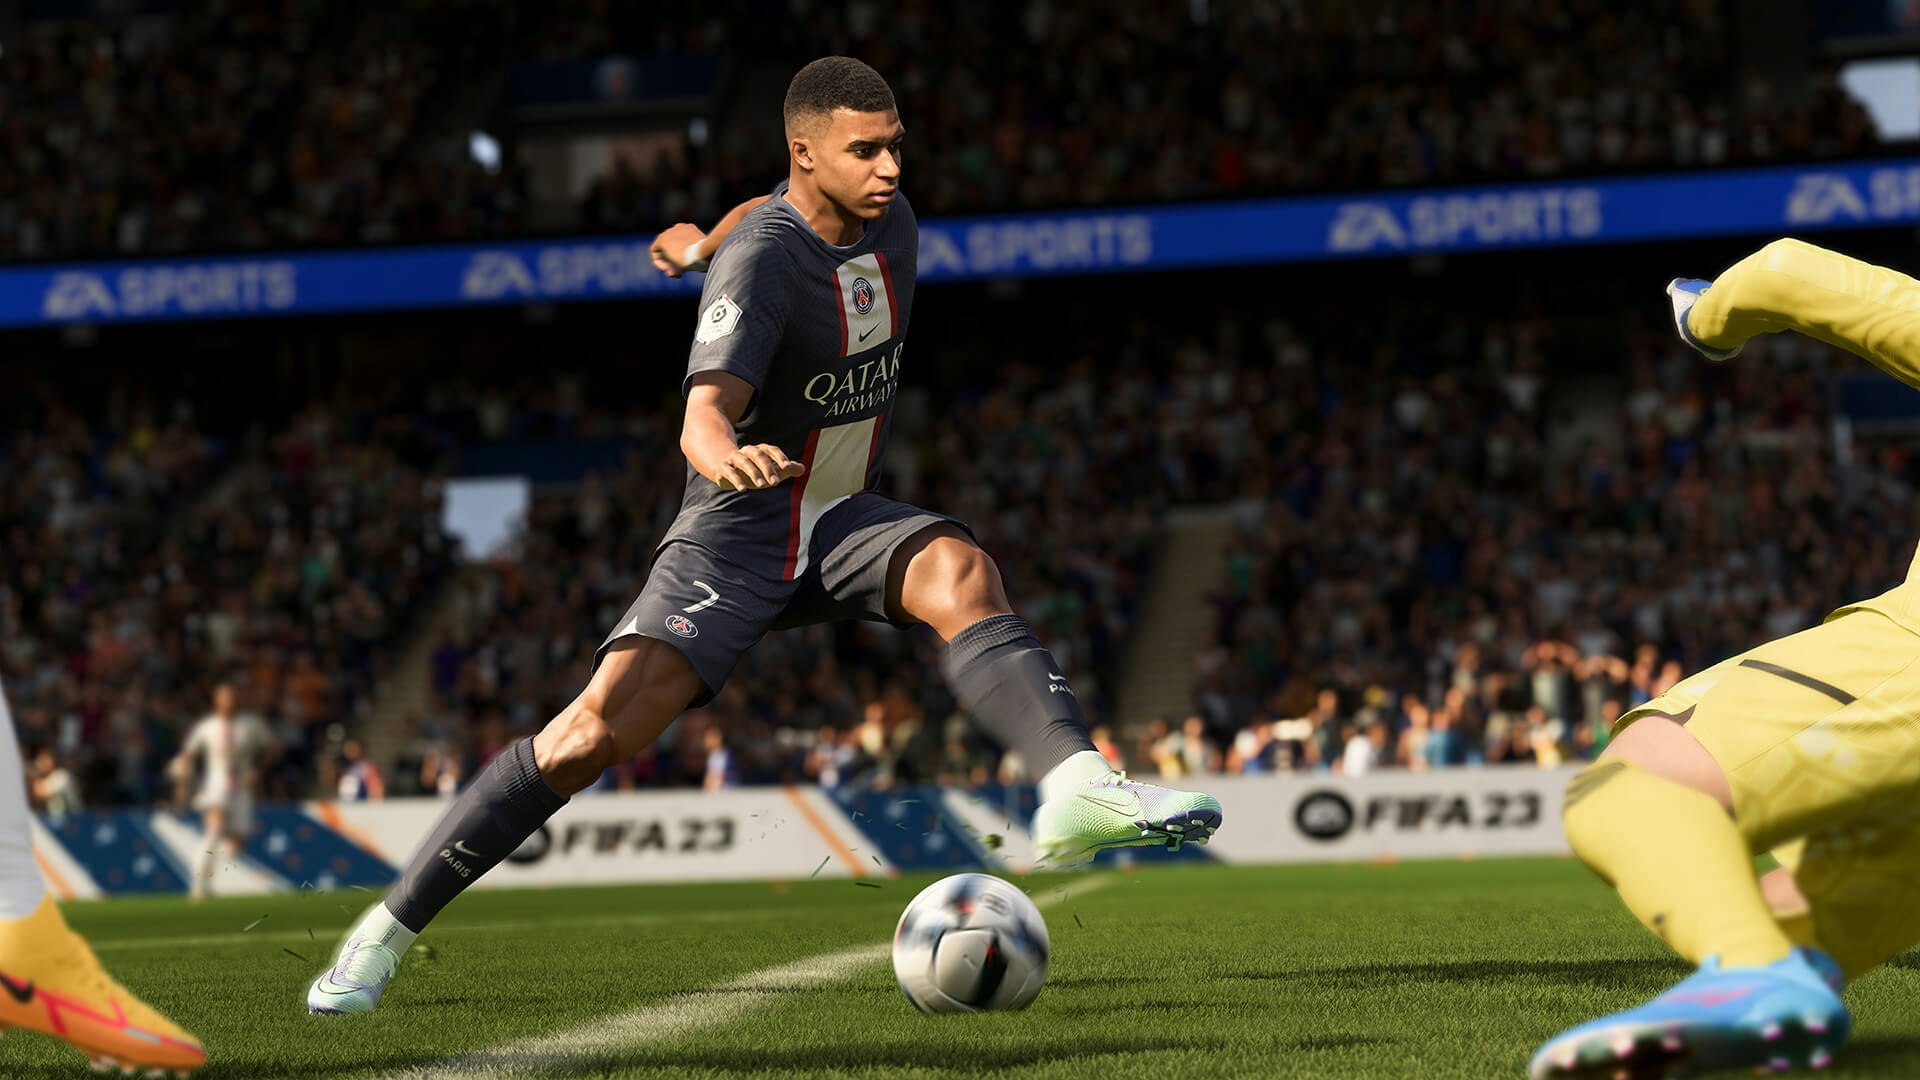 How ingame advertising can engage audiences during large sporting